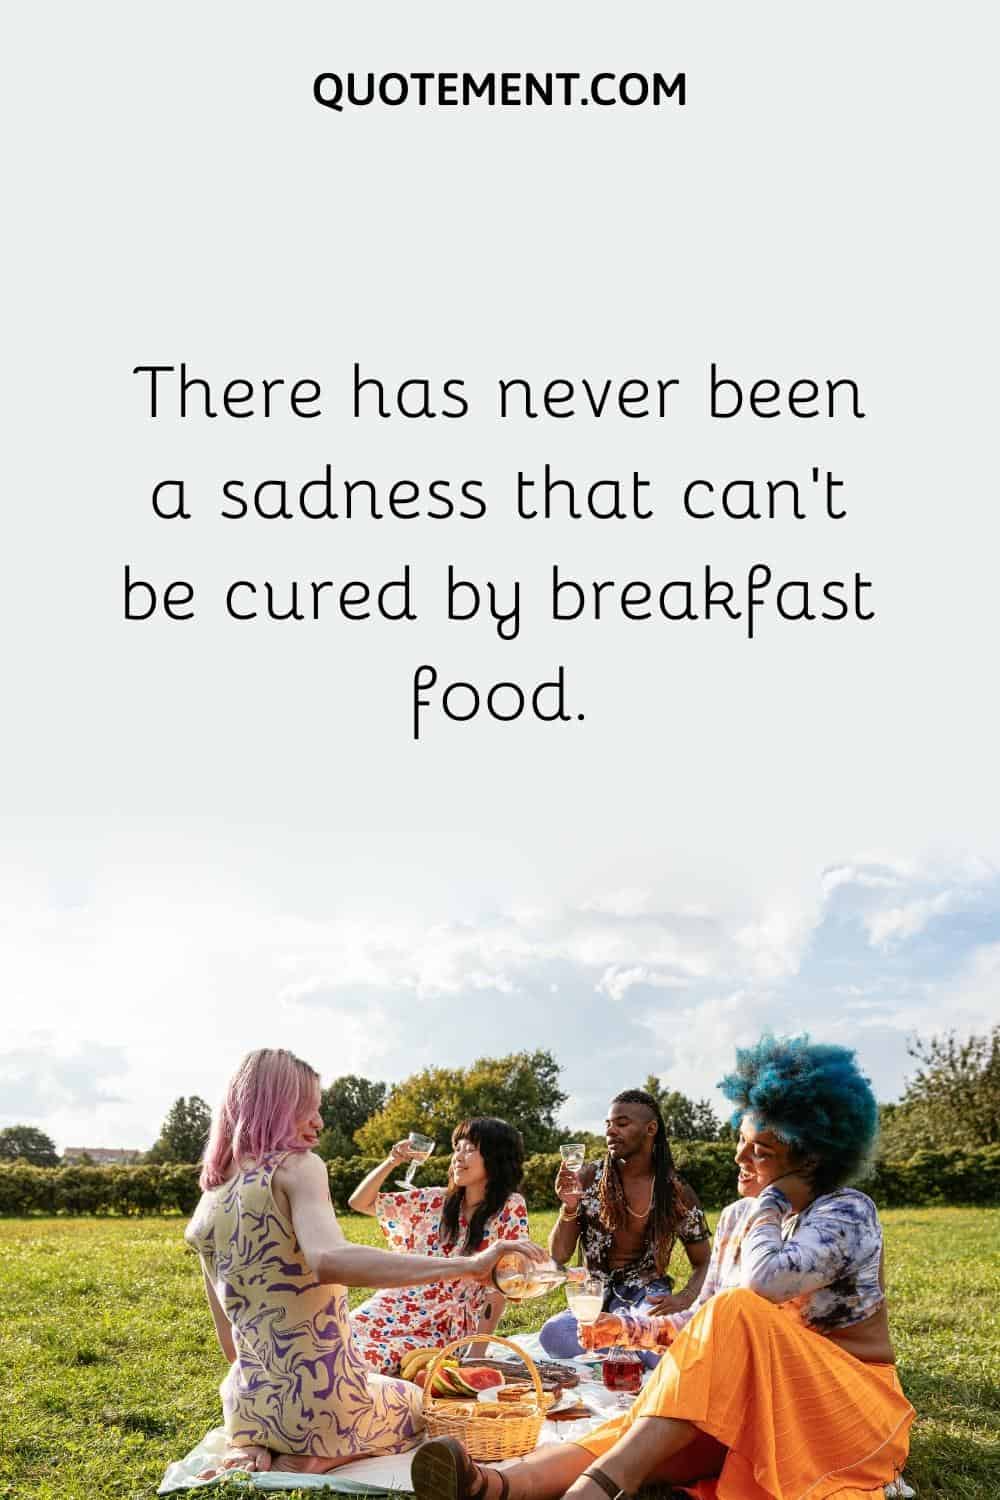 There has never been a sadness that can’t be cured by breakfast food.